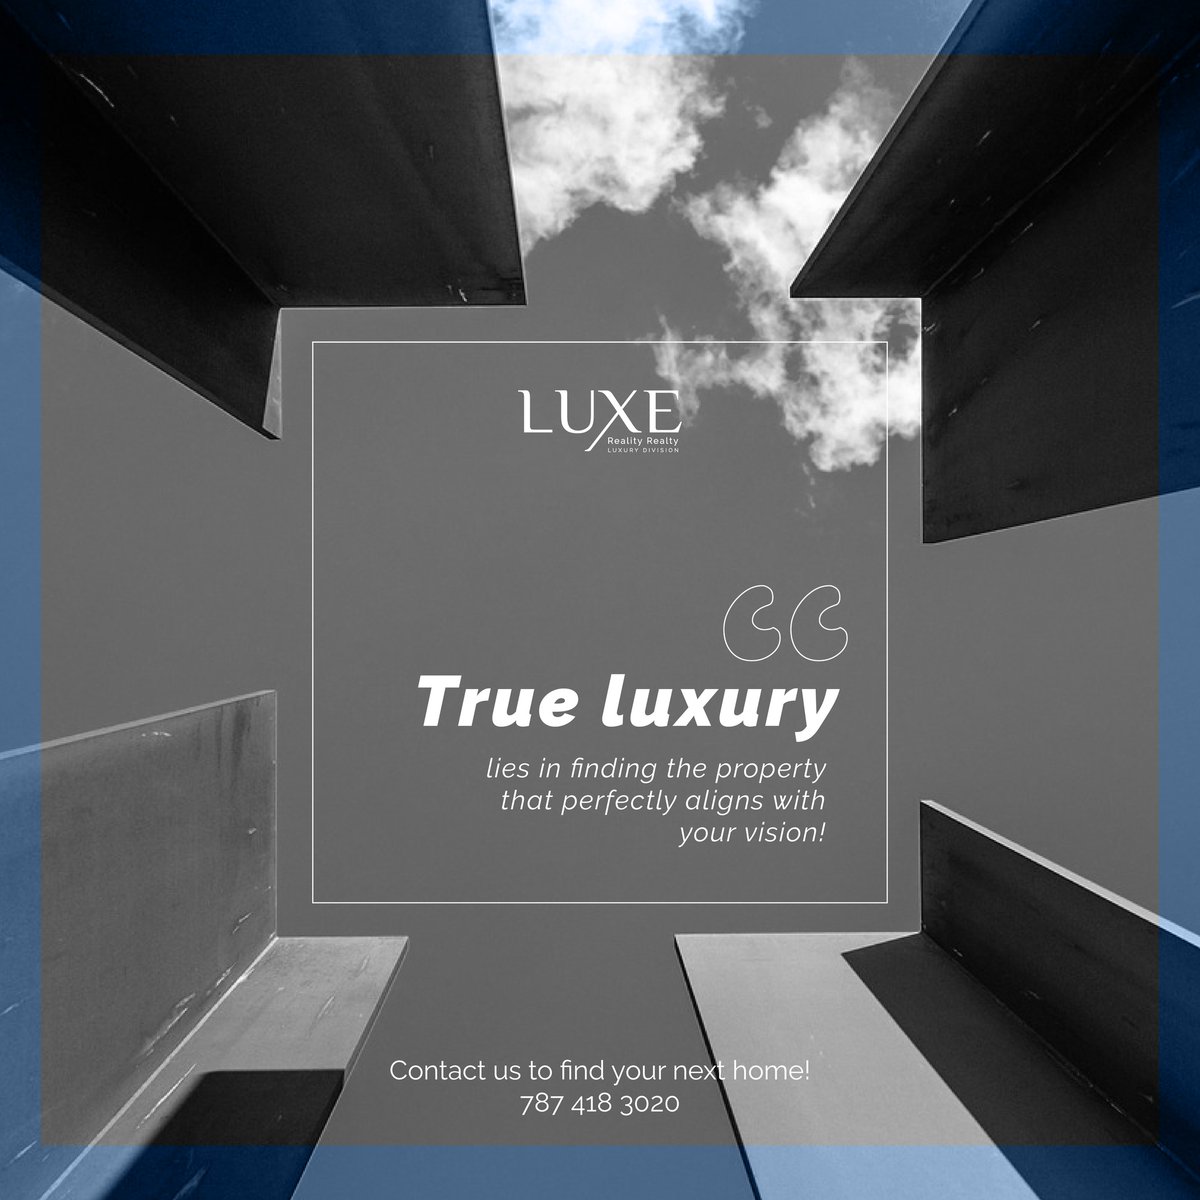 Discover true luxury in Puerto Rico by finding the property that perfectly matches your vision!
From stunning retreats to modern marvels, your dream home awaits.

Contact us today!
787-428-3020

#LuxePuertoRico #LuxuryRealEstate #PuertoRicoHomes #DreamHome